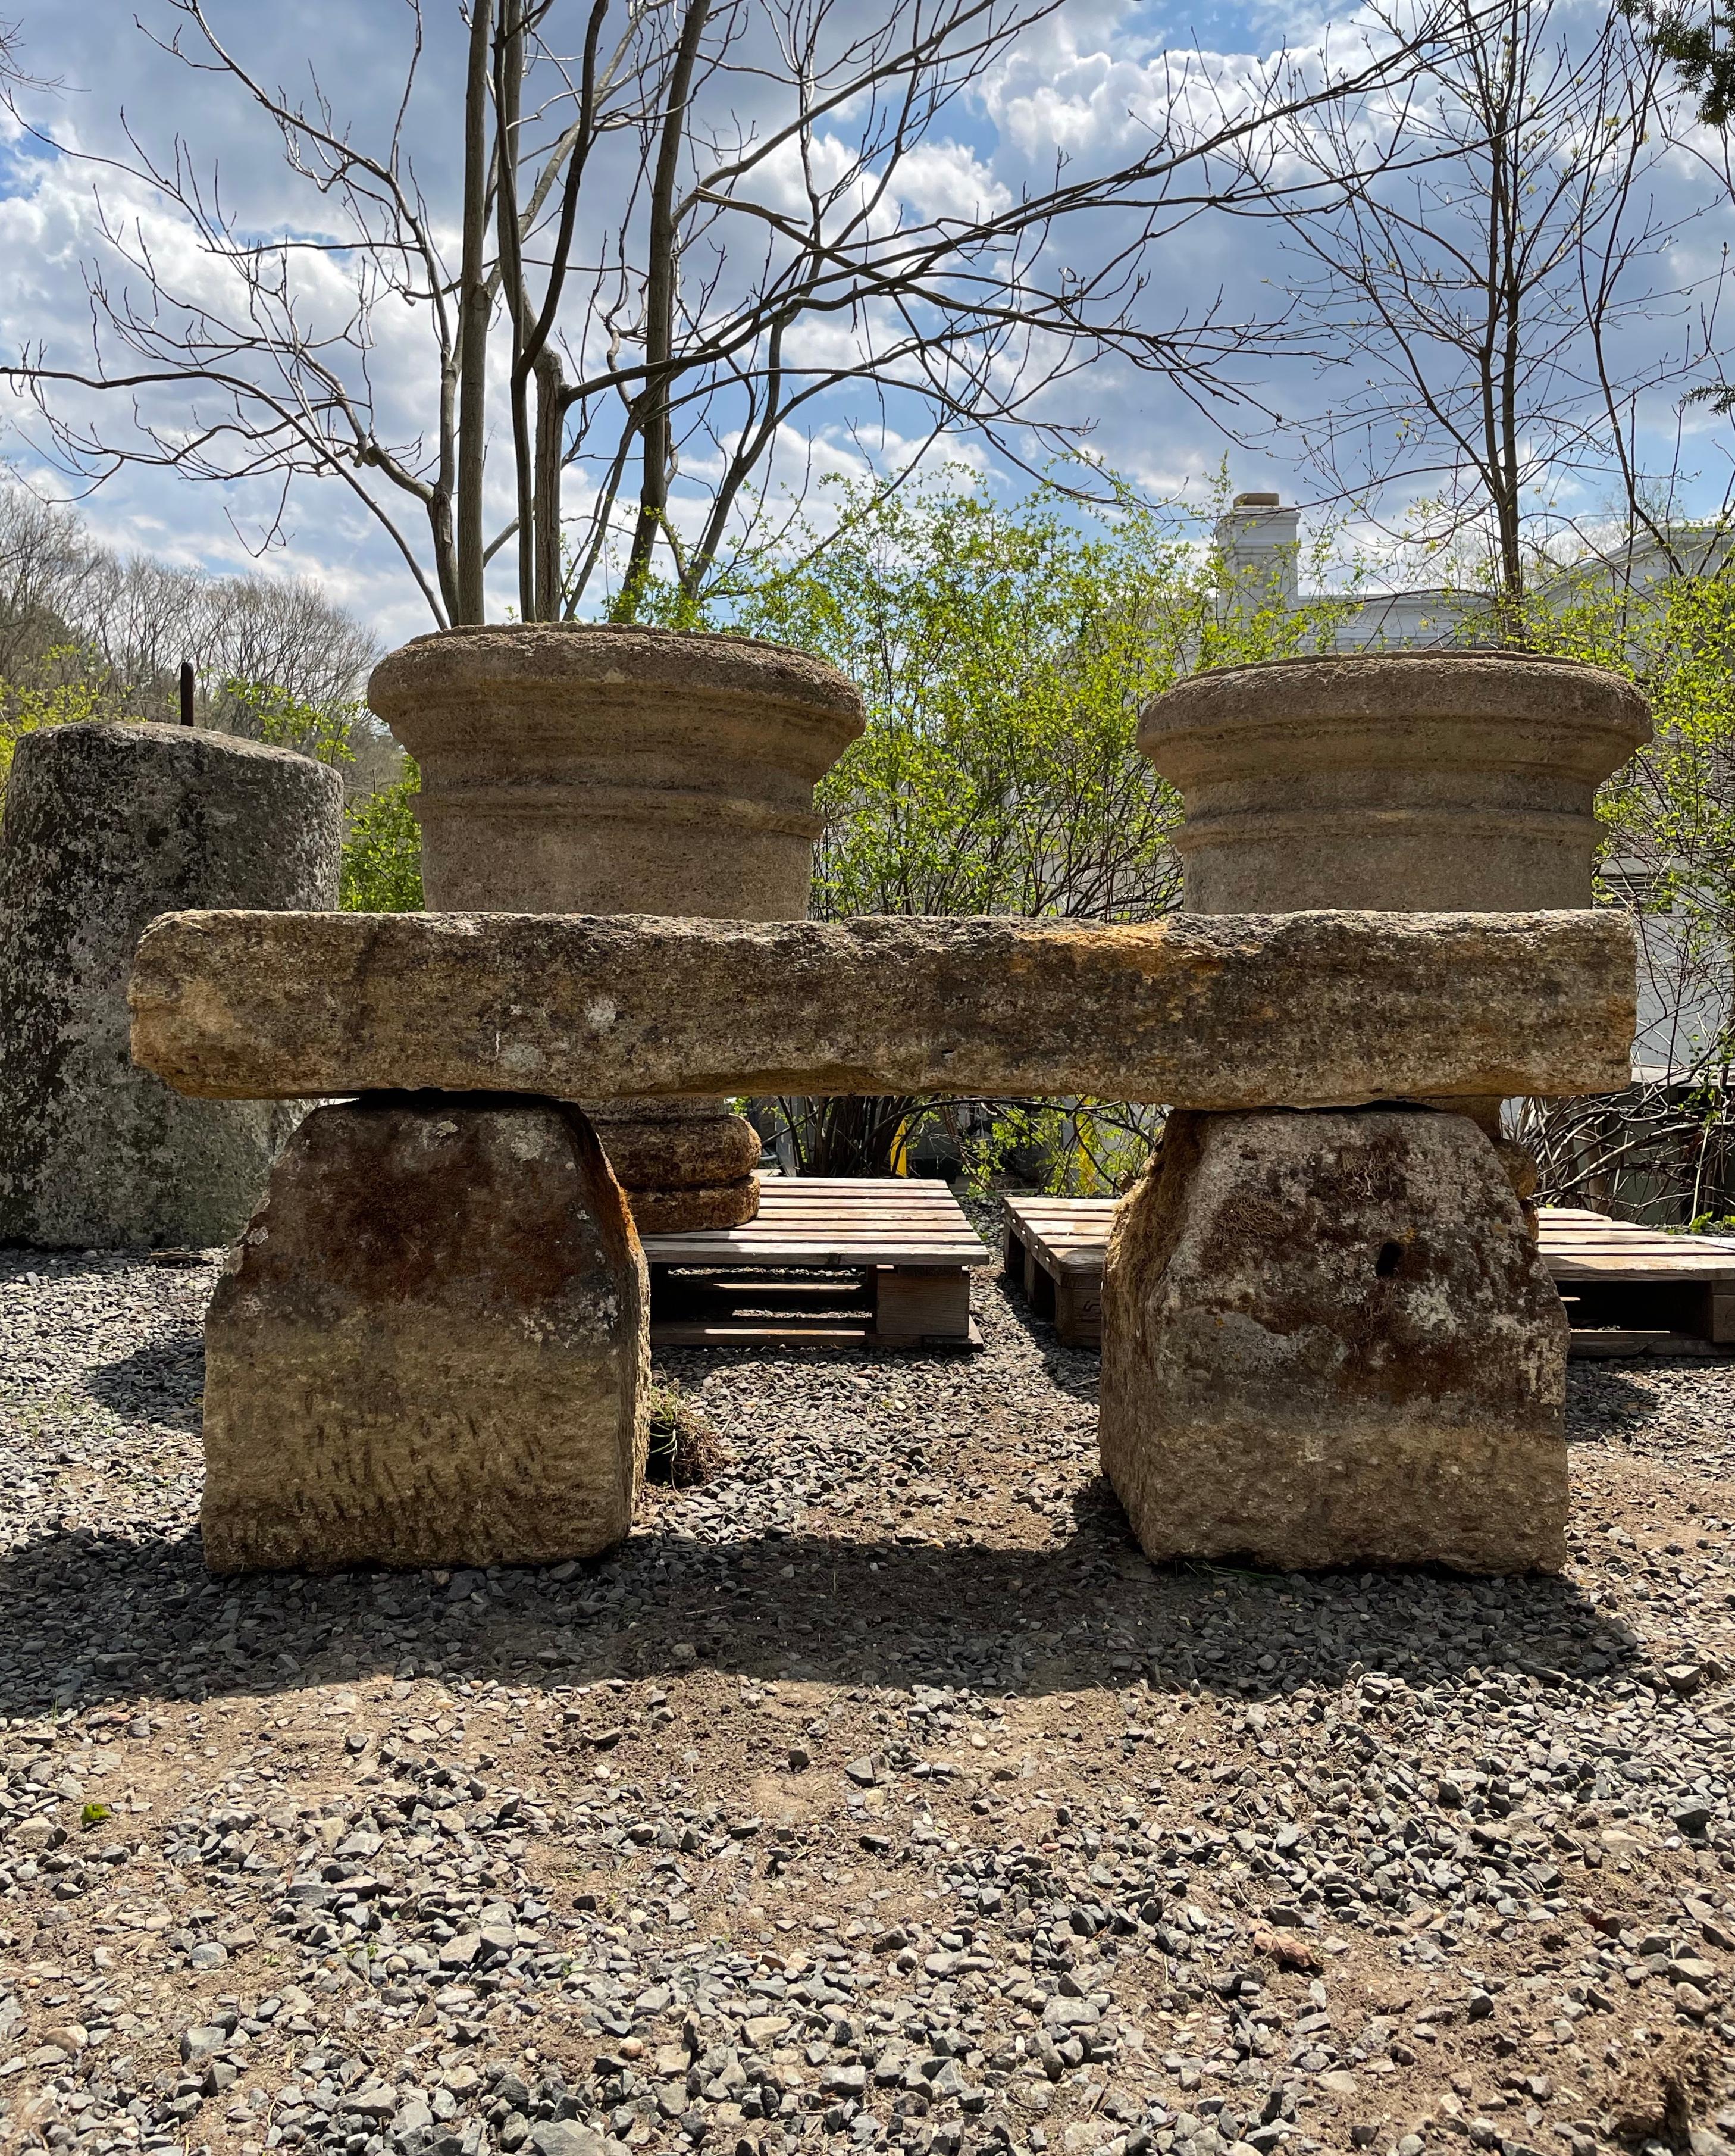 This is a wonderful stone bench, hand-carved from Baux stone, found in Provence, and dating to the late 18th C. The two supports are loaded with moss that will green up and flower again if the bench is placed in a moist and shady location, and the